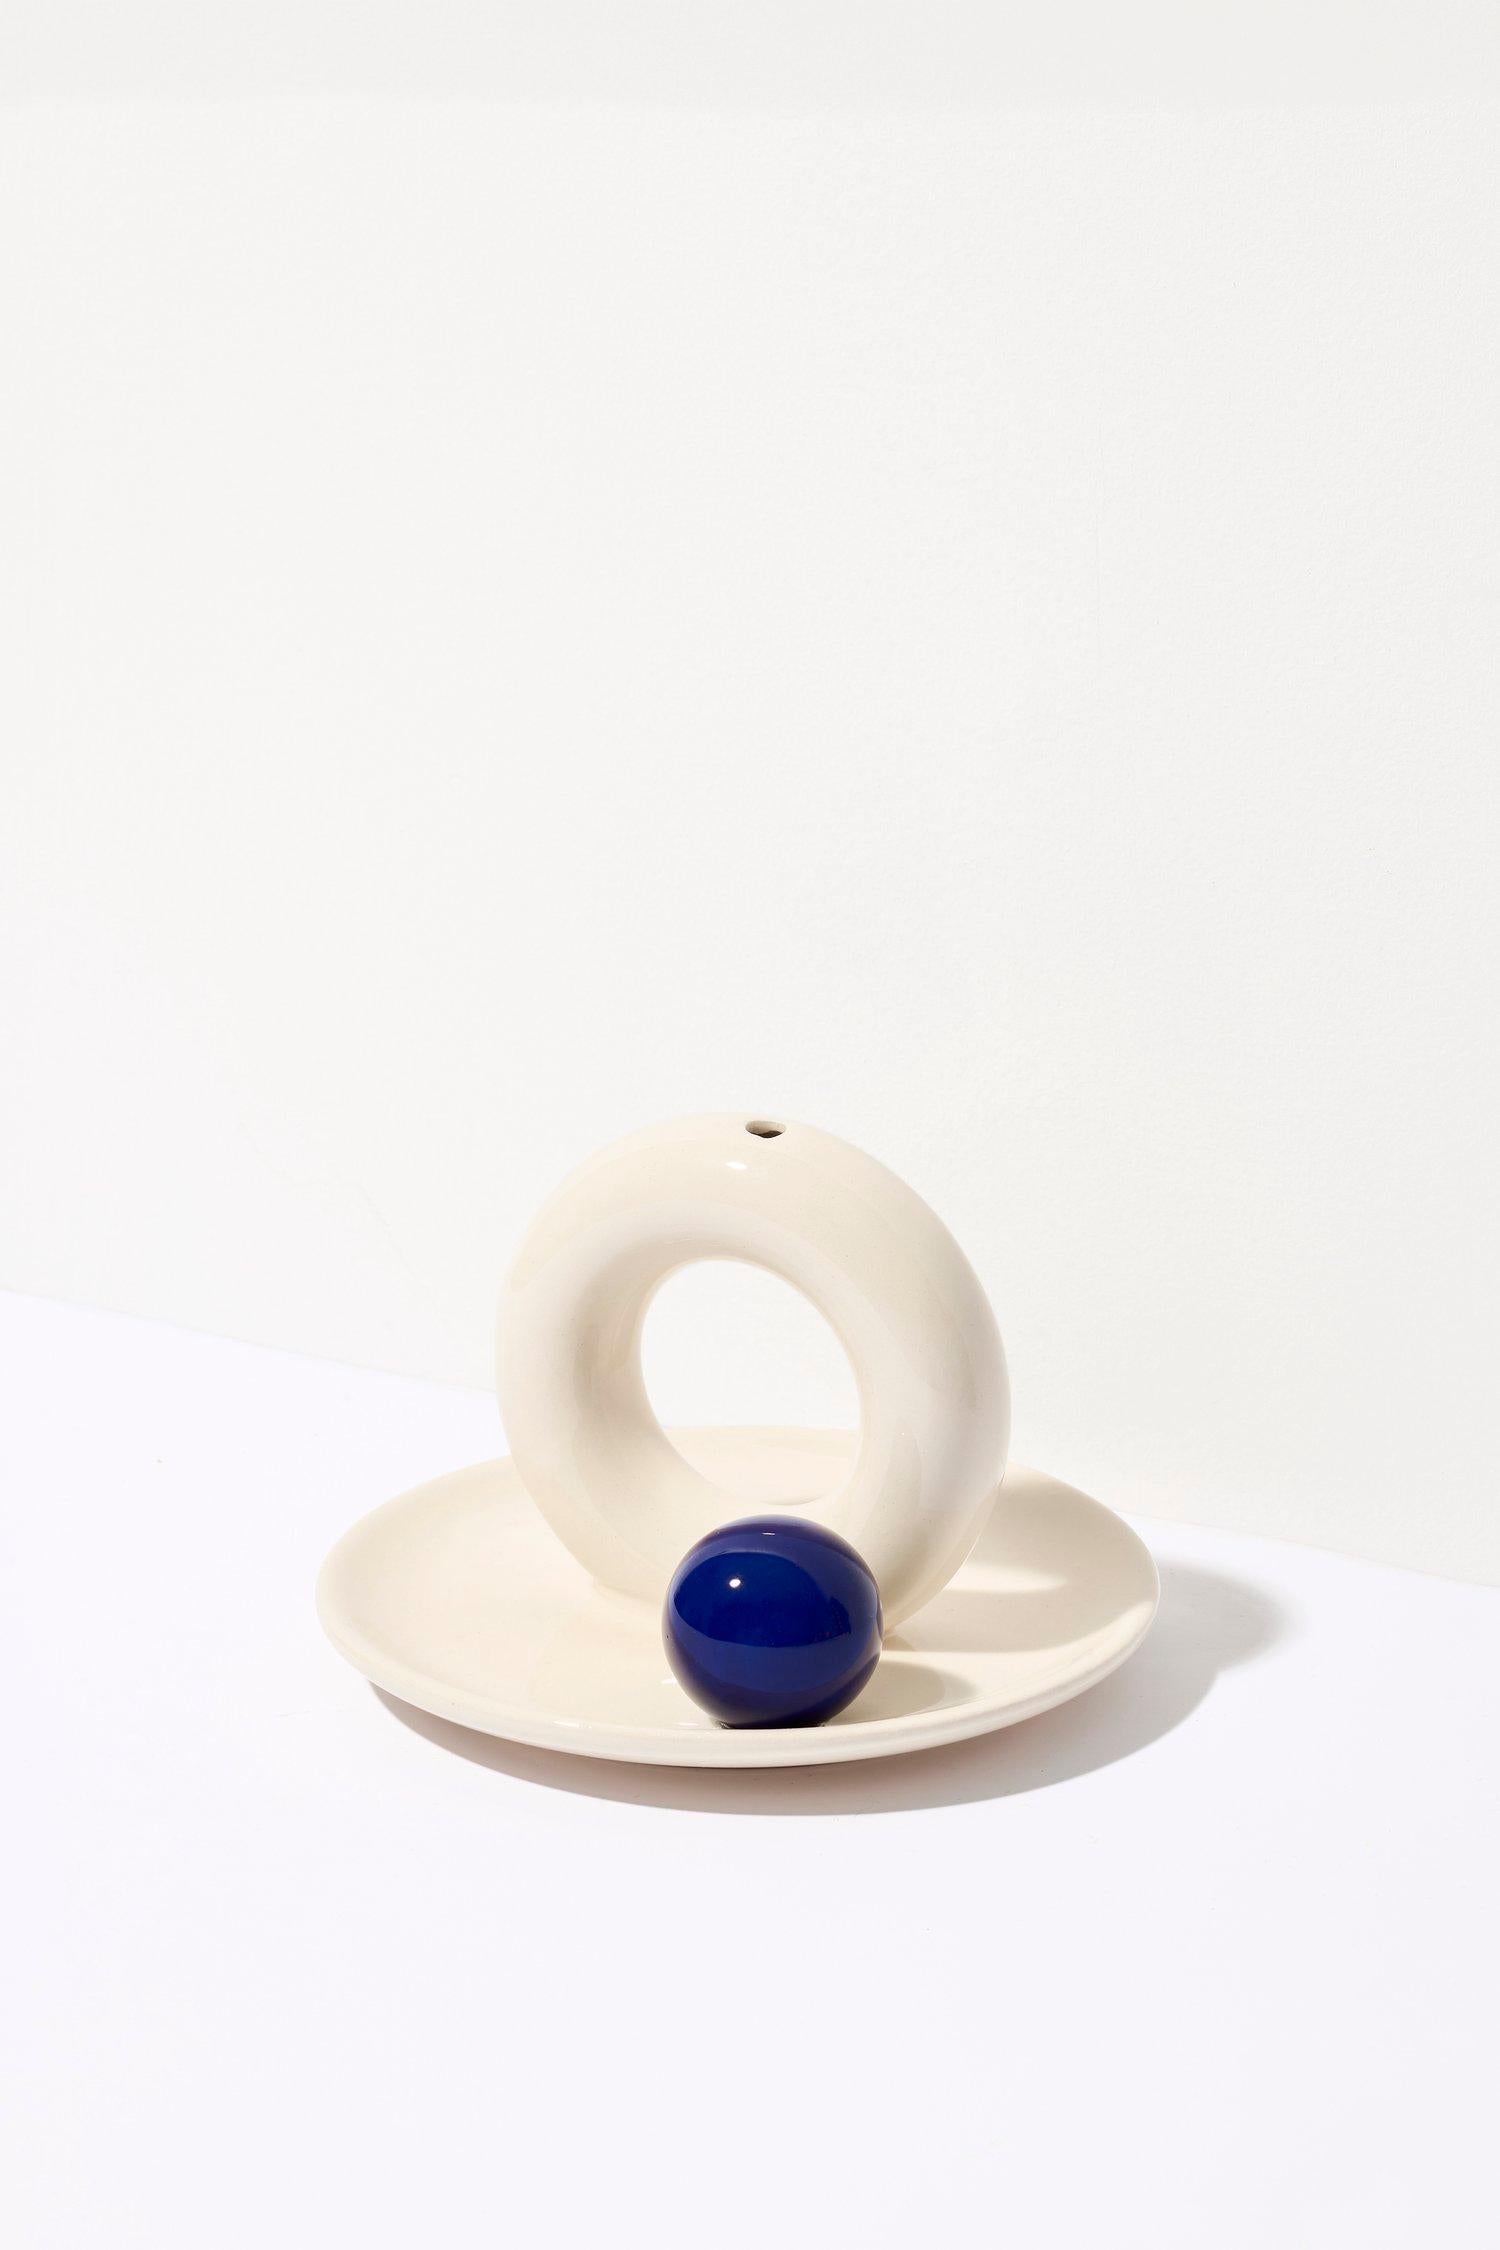 Aniela MINI is the answer to the need for a small item - a coaster that can be used to hold jewelry, sweets or burn incense sticks.

Beige platter
Cobalt blue ball

ø 15 cm
two holes for incense 